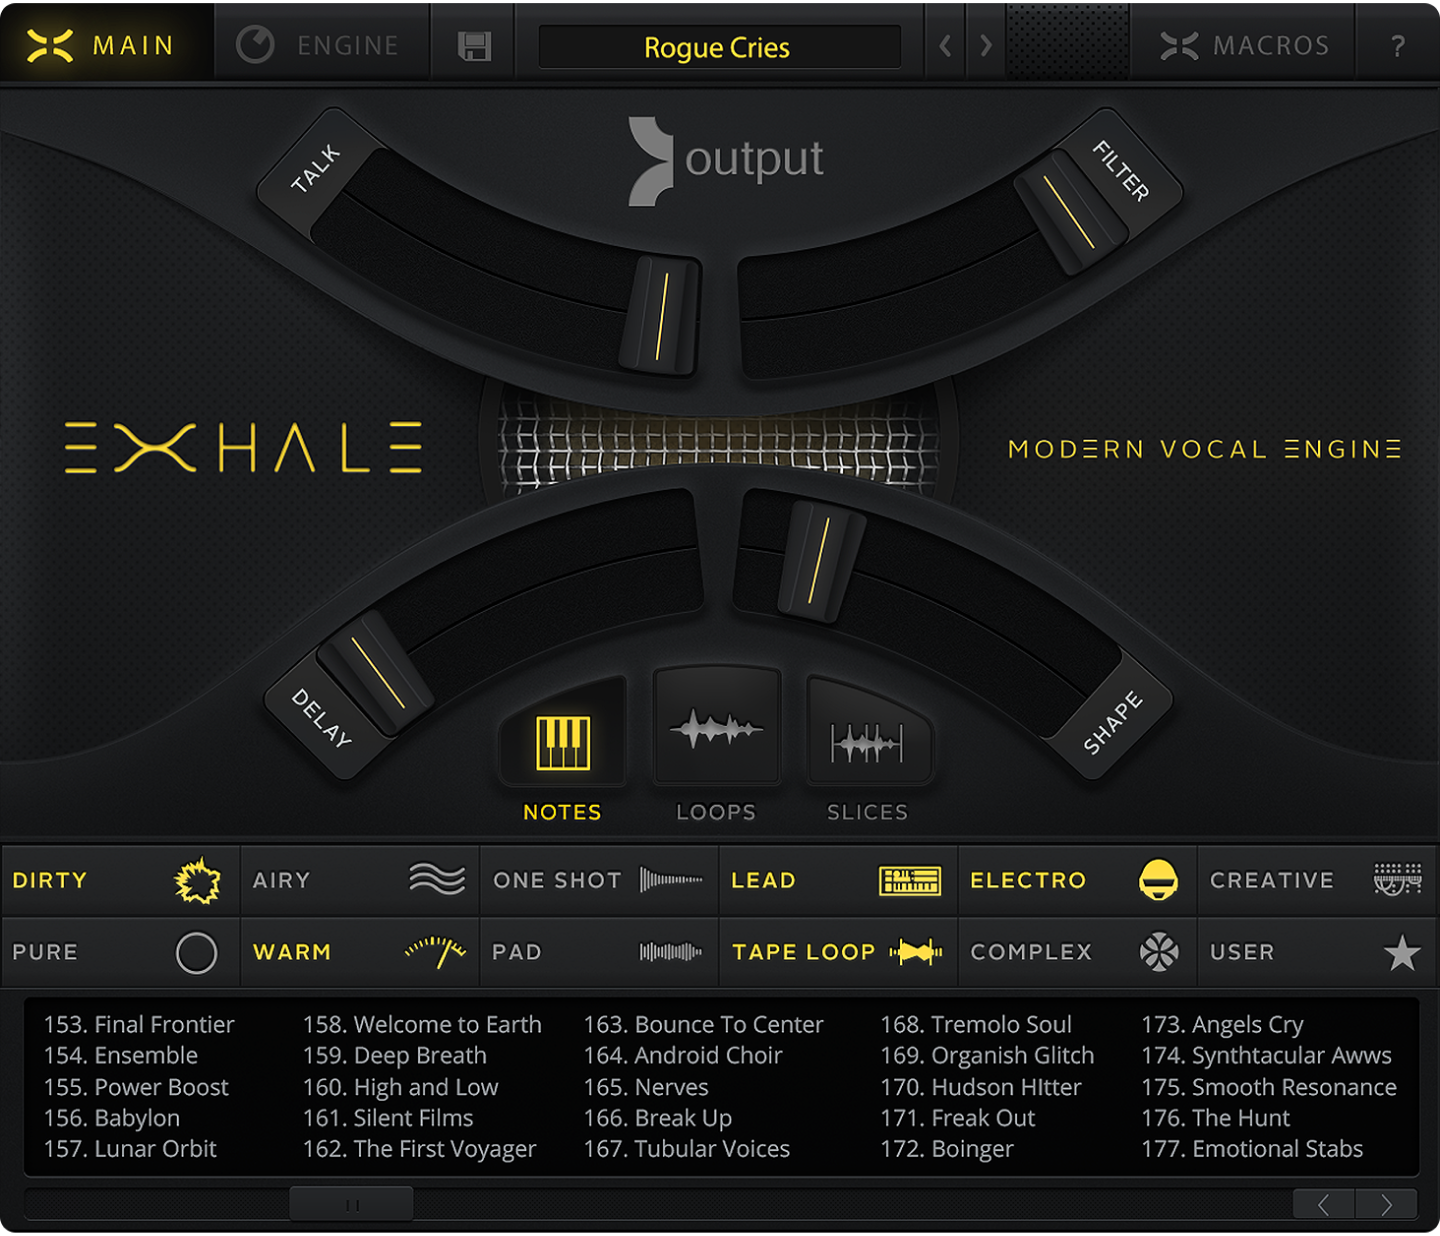 Exhale - Modern Vocal Engine | Output